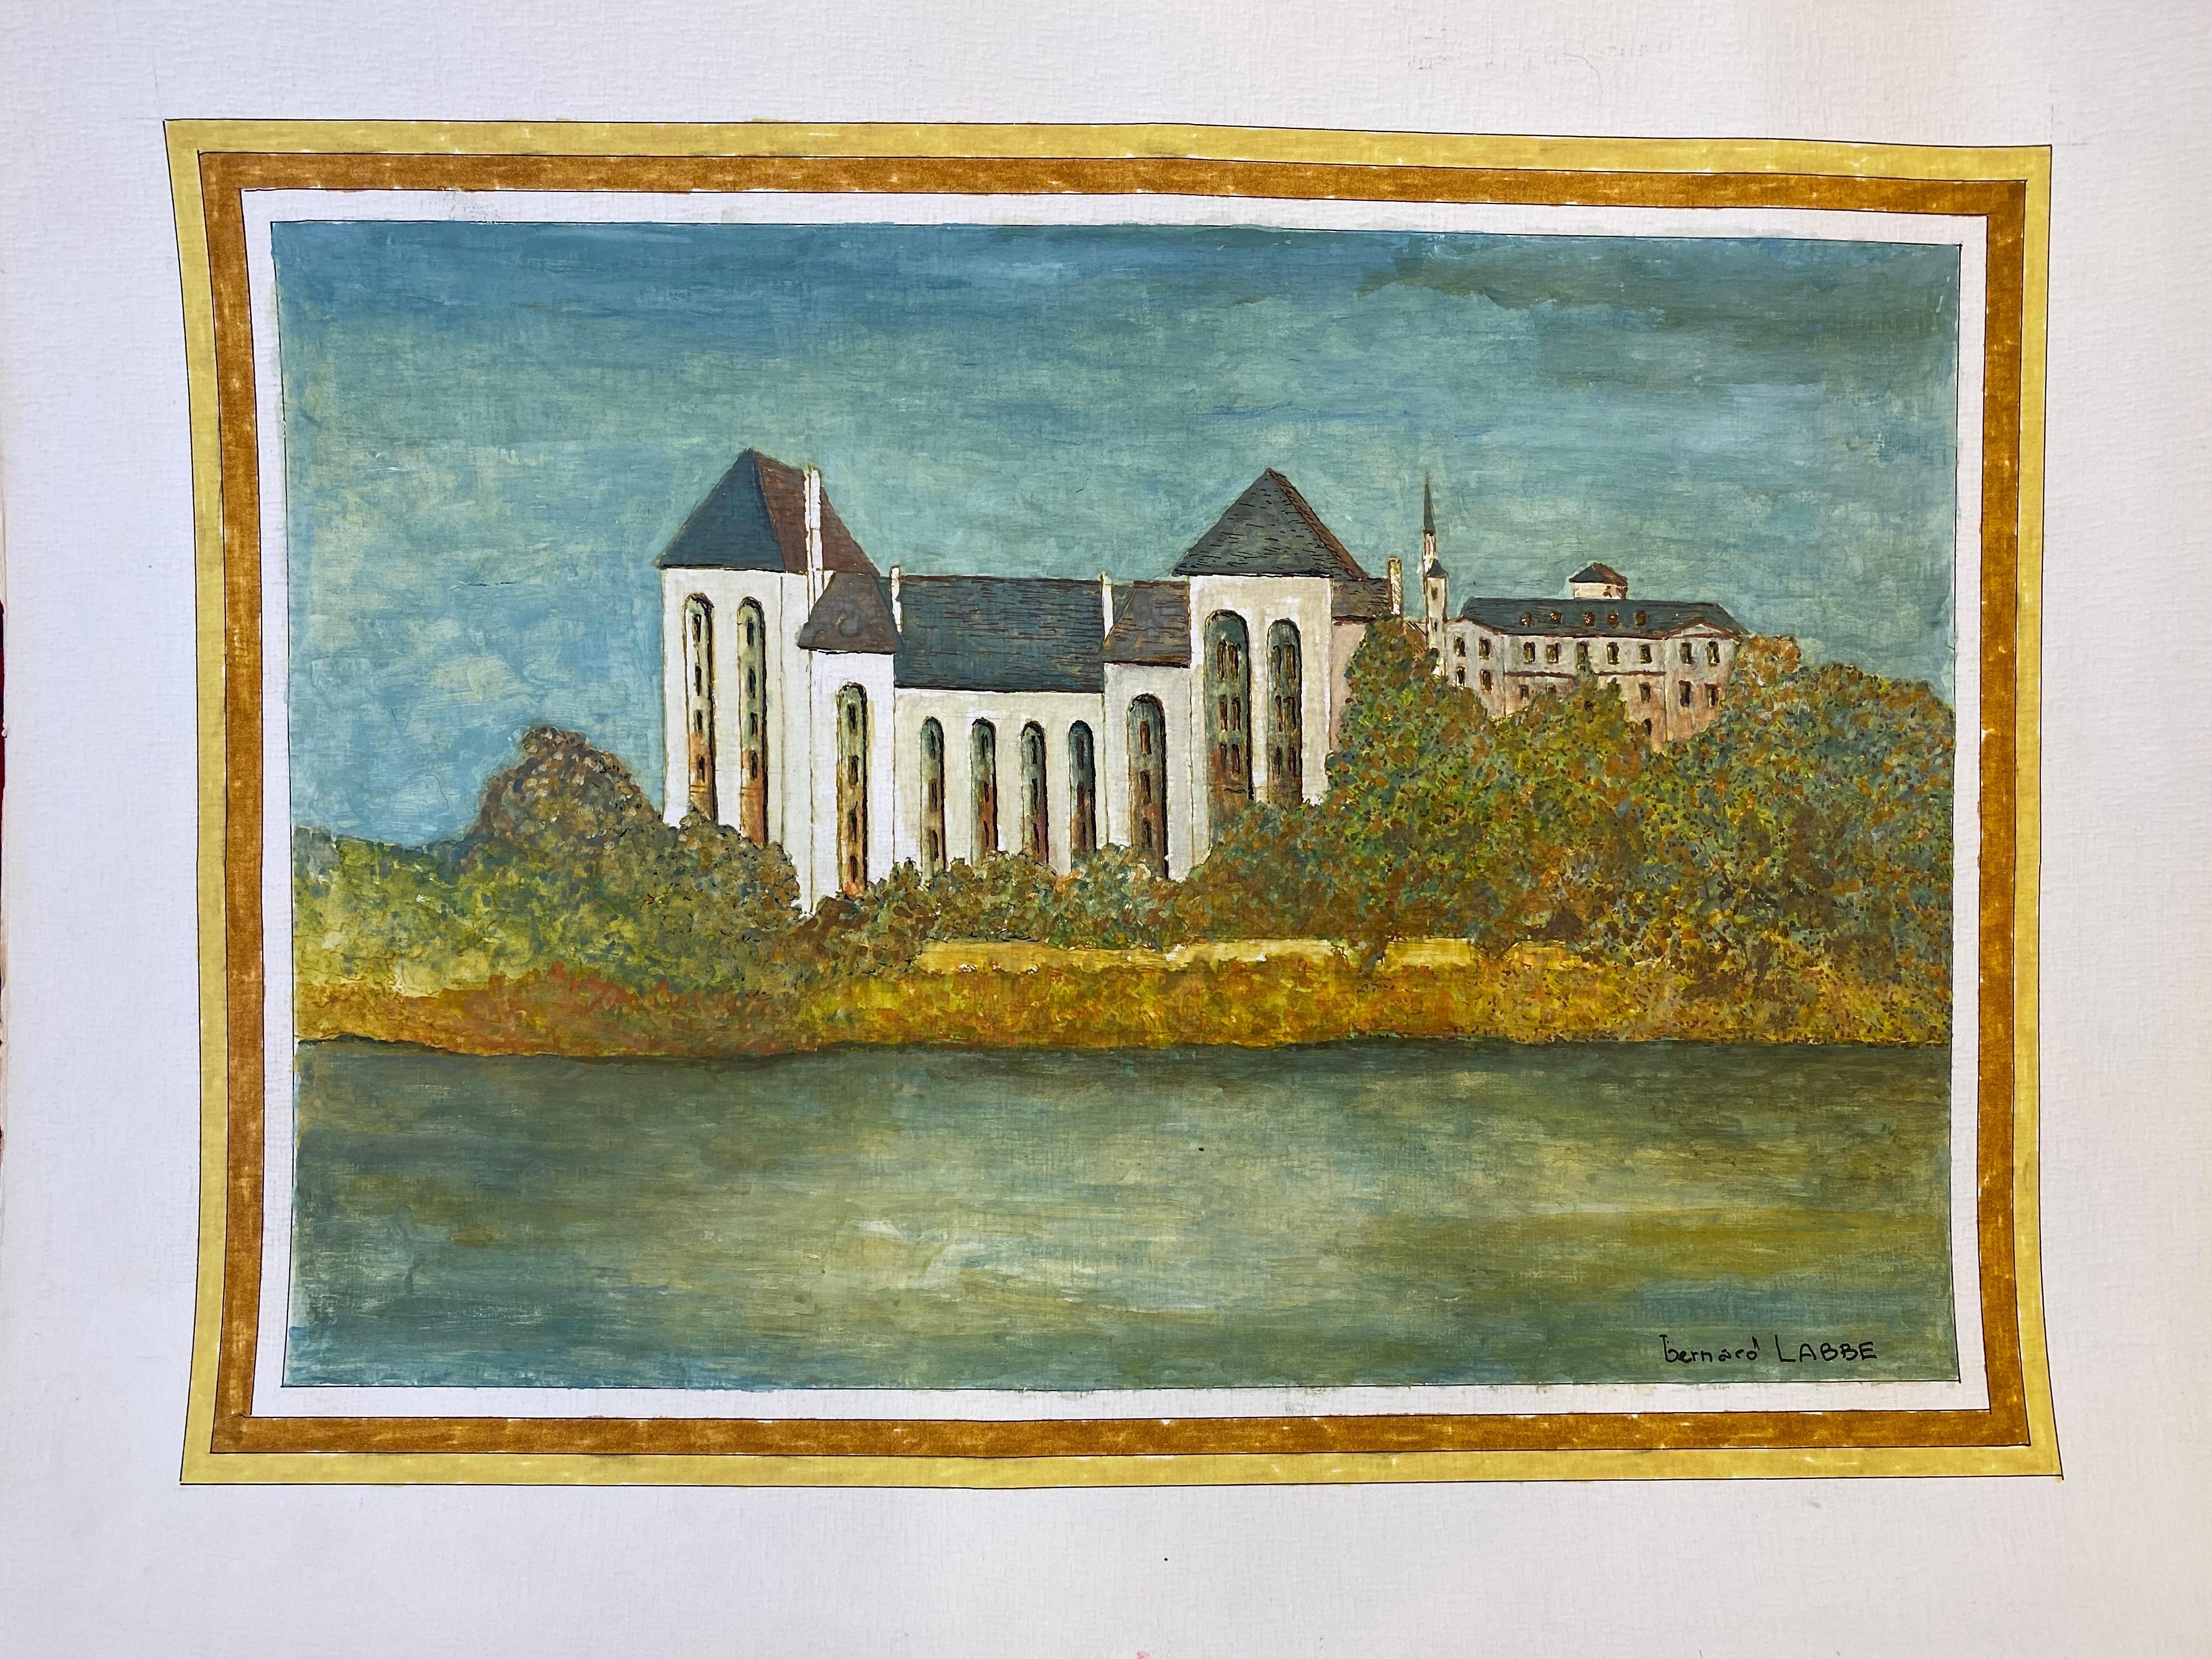 French Buildings
by Bernard Labbe (French mid 20th century), signed, stamped verso
original watercolour/ gouache painting on paper, 
overall size: 19.5 x 25.5 inches
condition: very good and ready to be enjoyed. 

provenance: the artists